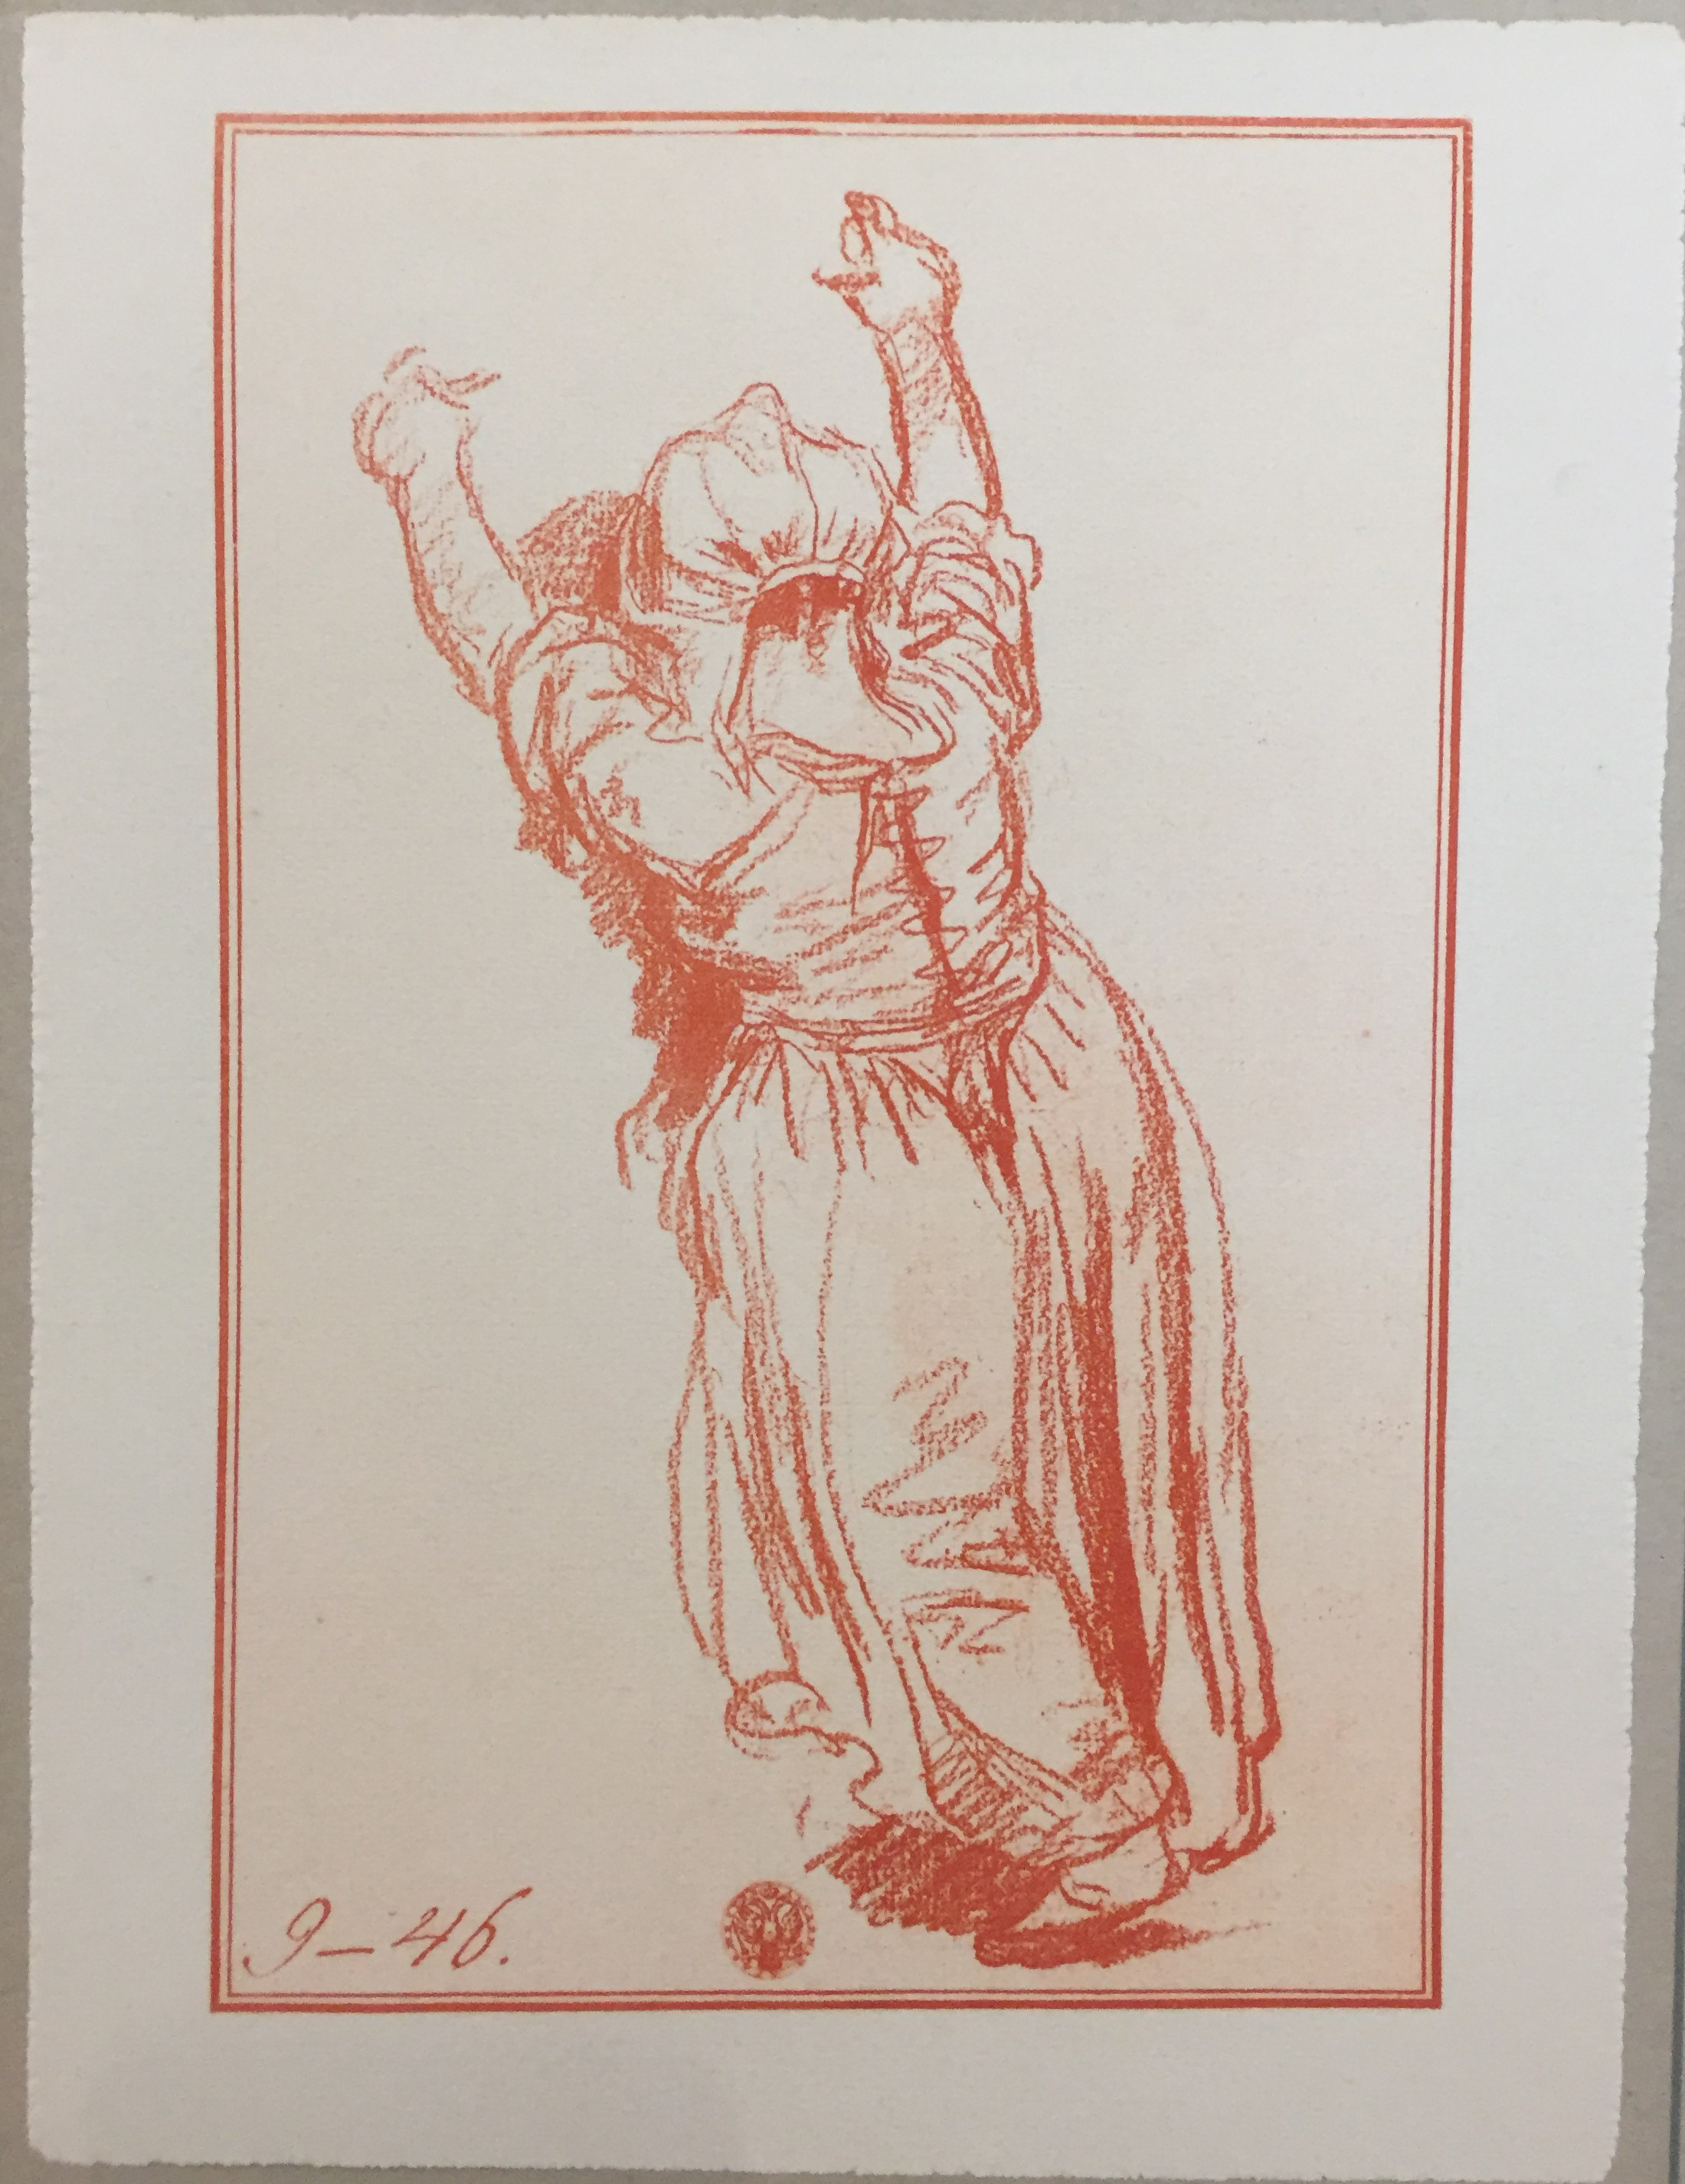 A photograph of a sketch depicting a young girl with her arms stretching above her head. She seems to be leaning her forehead against a larger figure. The child wears a dress, and she is drawn entirely in scarlet-colored strokes.